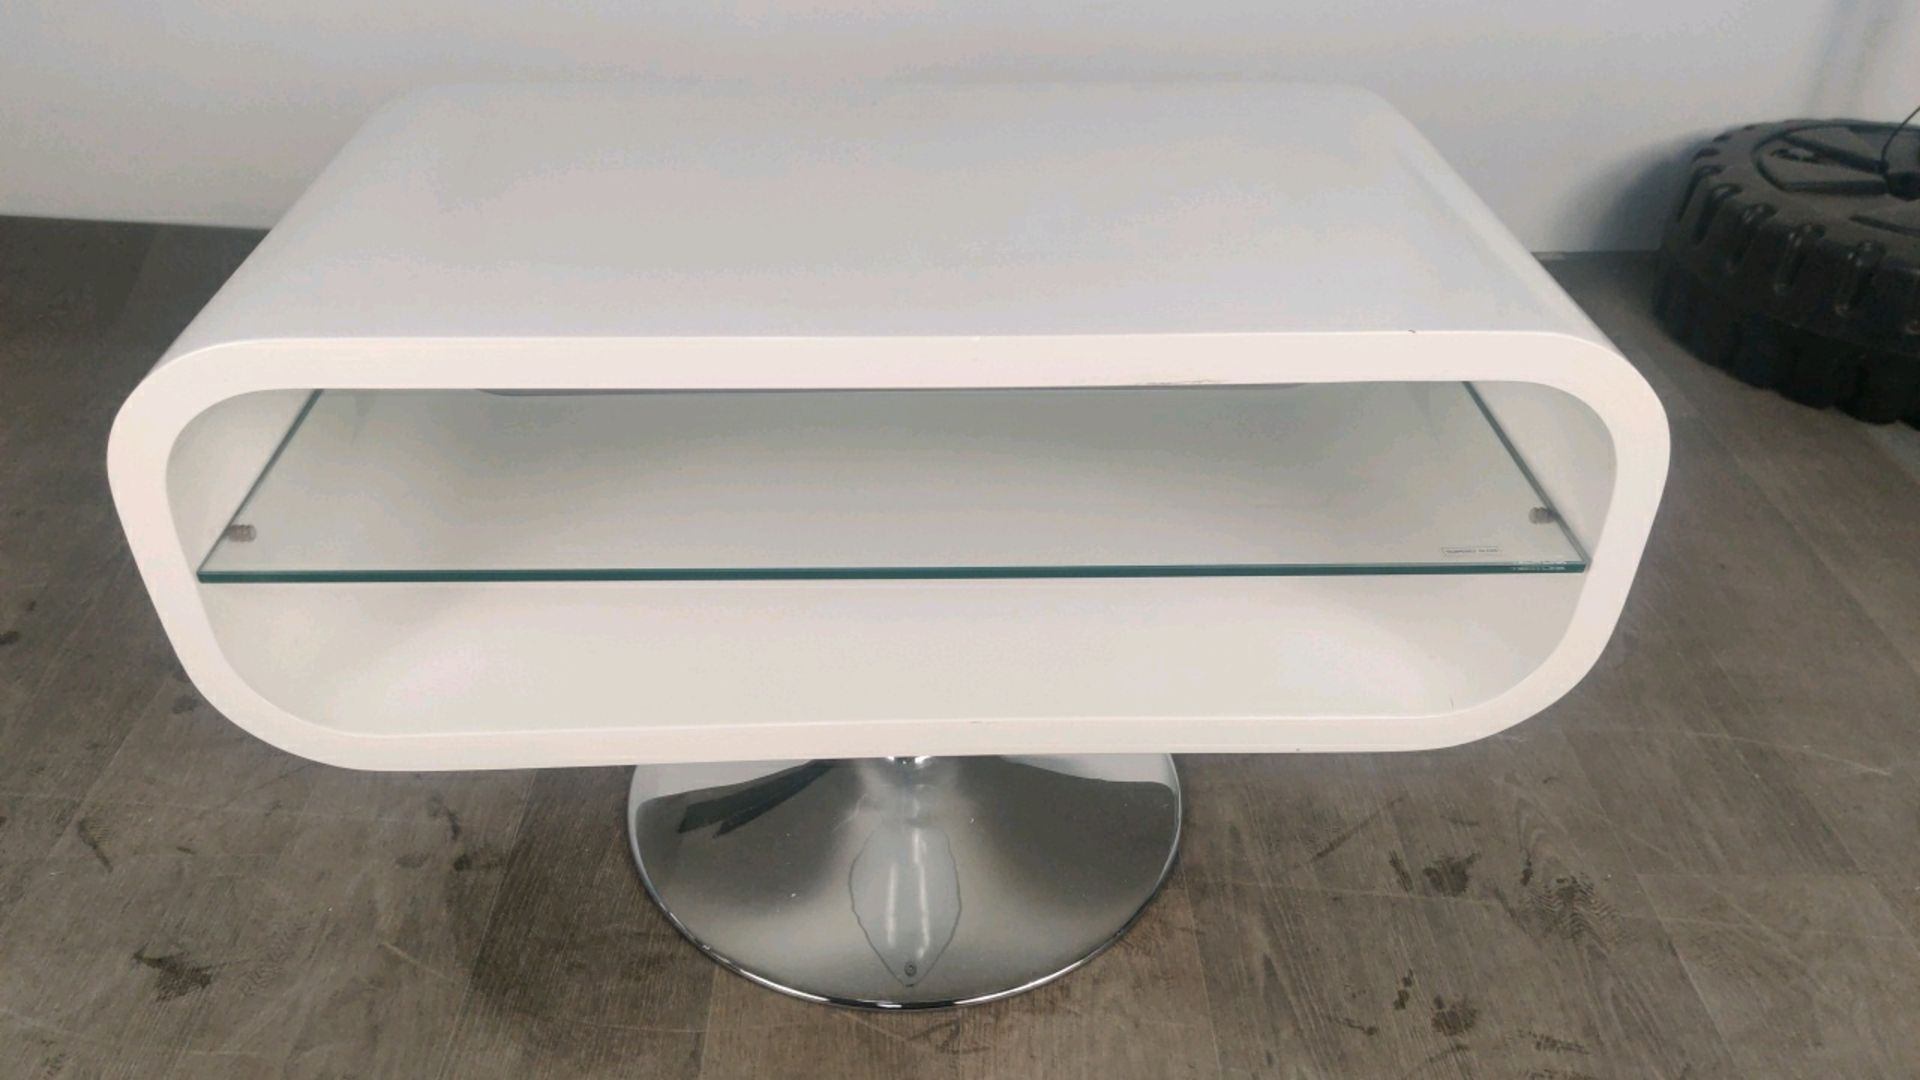 Techlink TV Stand - White Gloss - Image 2 of 3